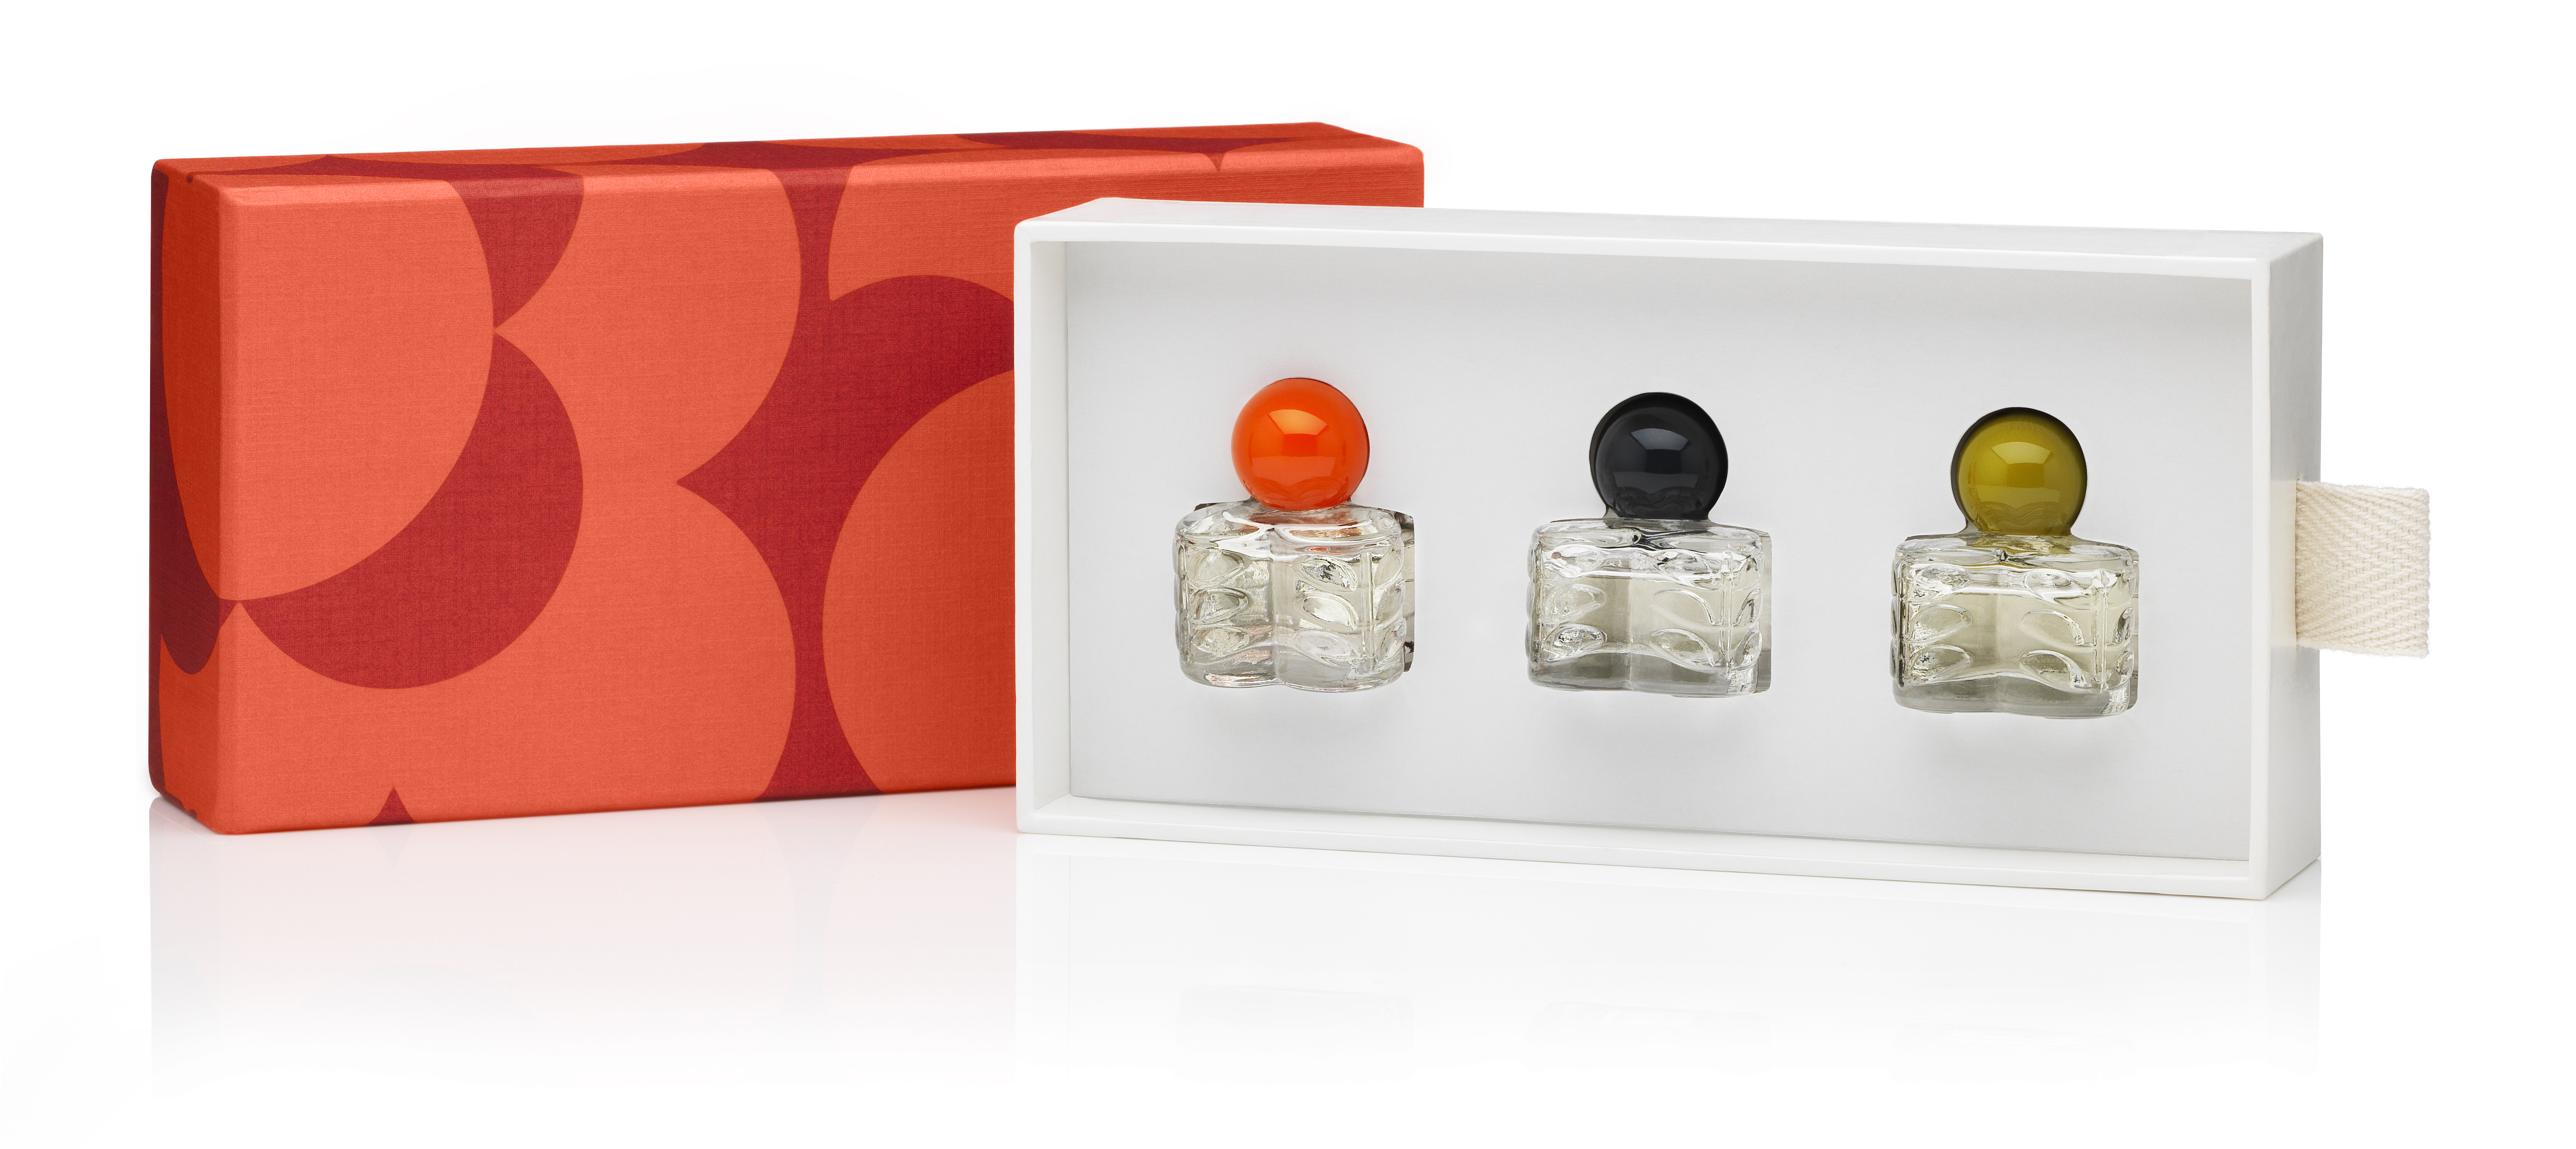 Orla Kiely launches 2016 Christmas gift sets